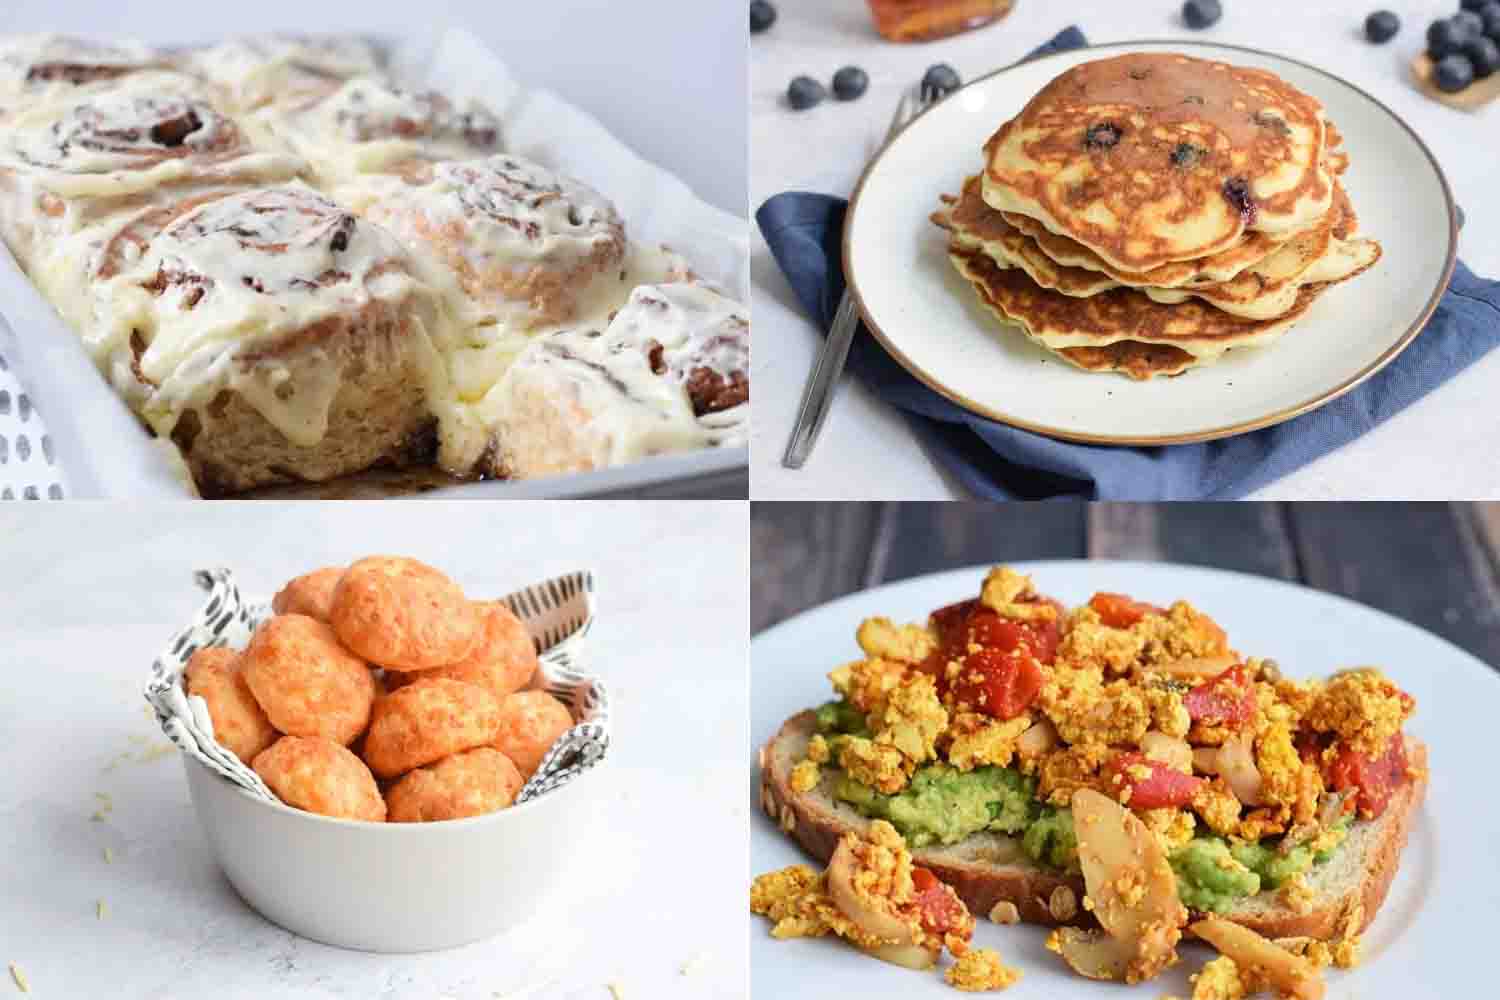 Four pictures of low FODMAP cinnamon rolls, American blueberry pancakes, cheese buns and scrambled tofu together